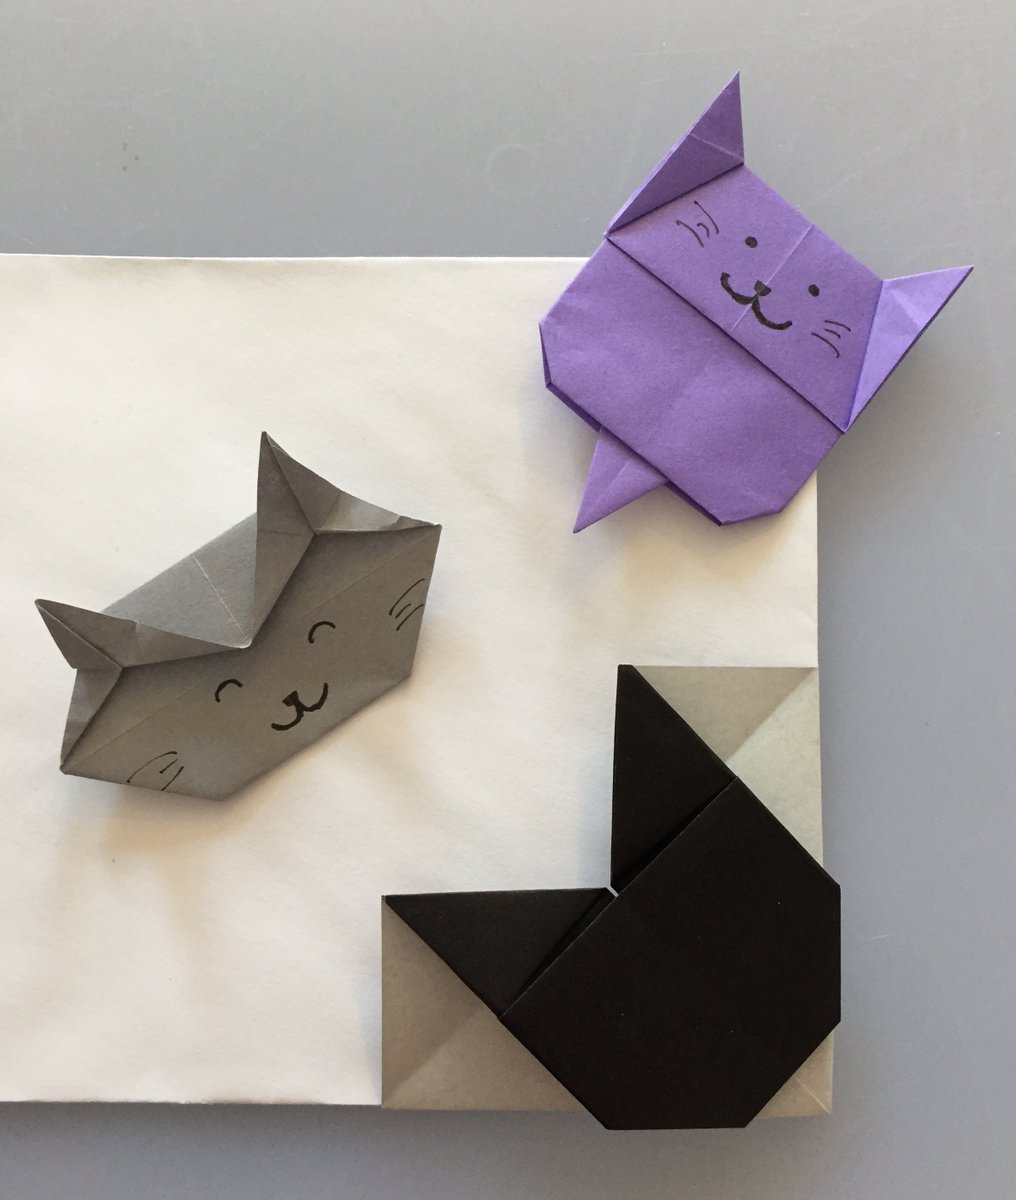 5. I realized a couple of weeks ago that you can’t do an online project without cats, so this week’s  #OnlineOrigami models are all  #cats. - 1 easy cat head- 3 different cat bookmarks